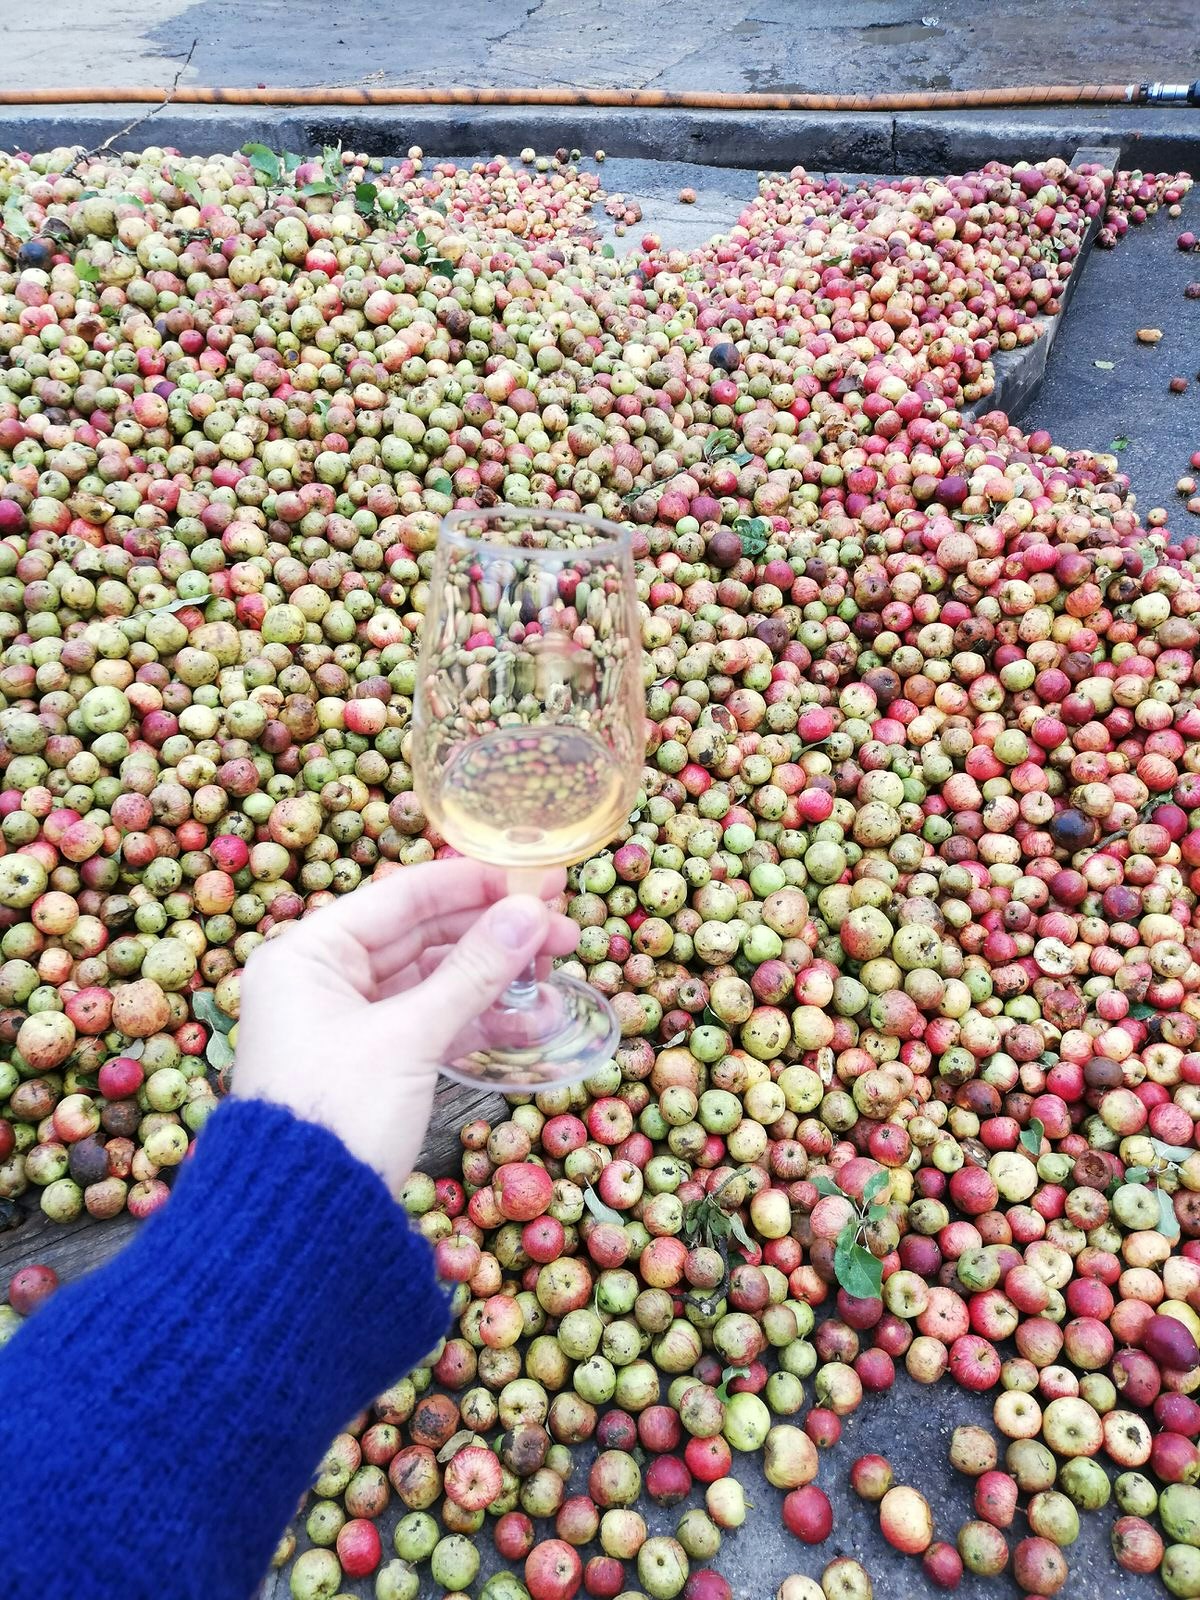 A hand holding a brandy glass with some amber-hued liquid in the bottom in front of a huge pile of apples